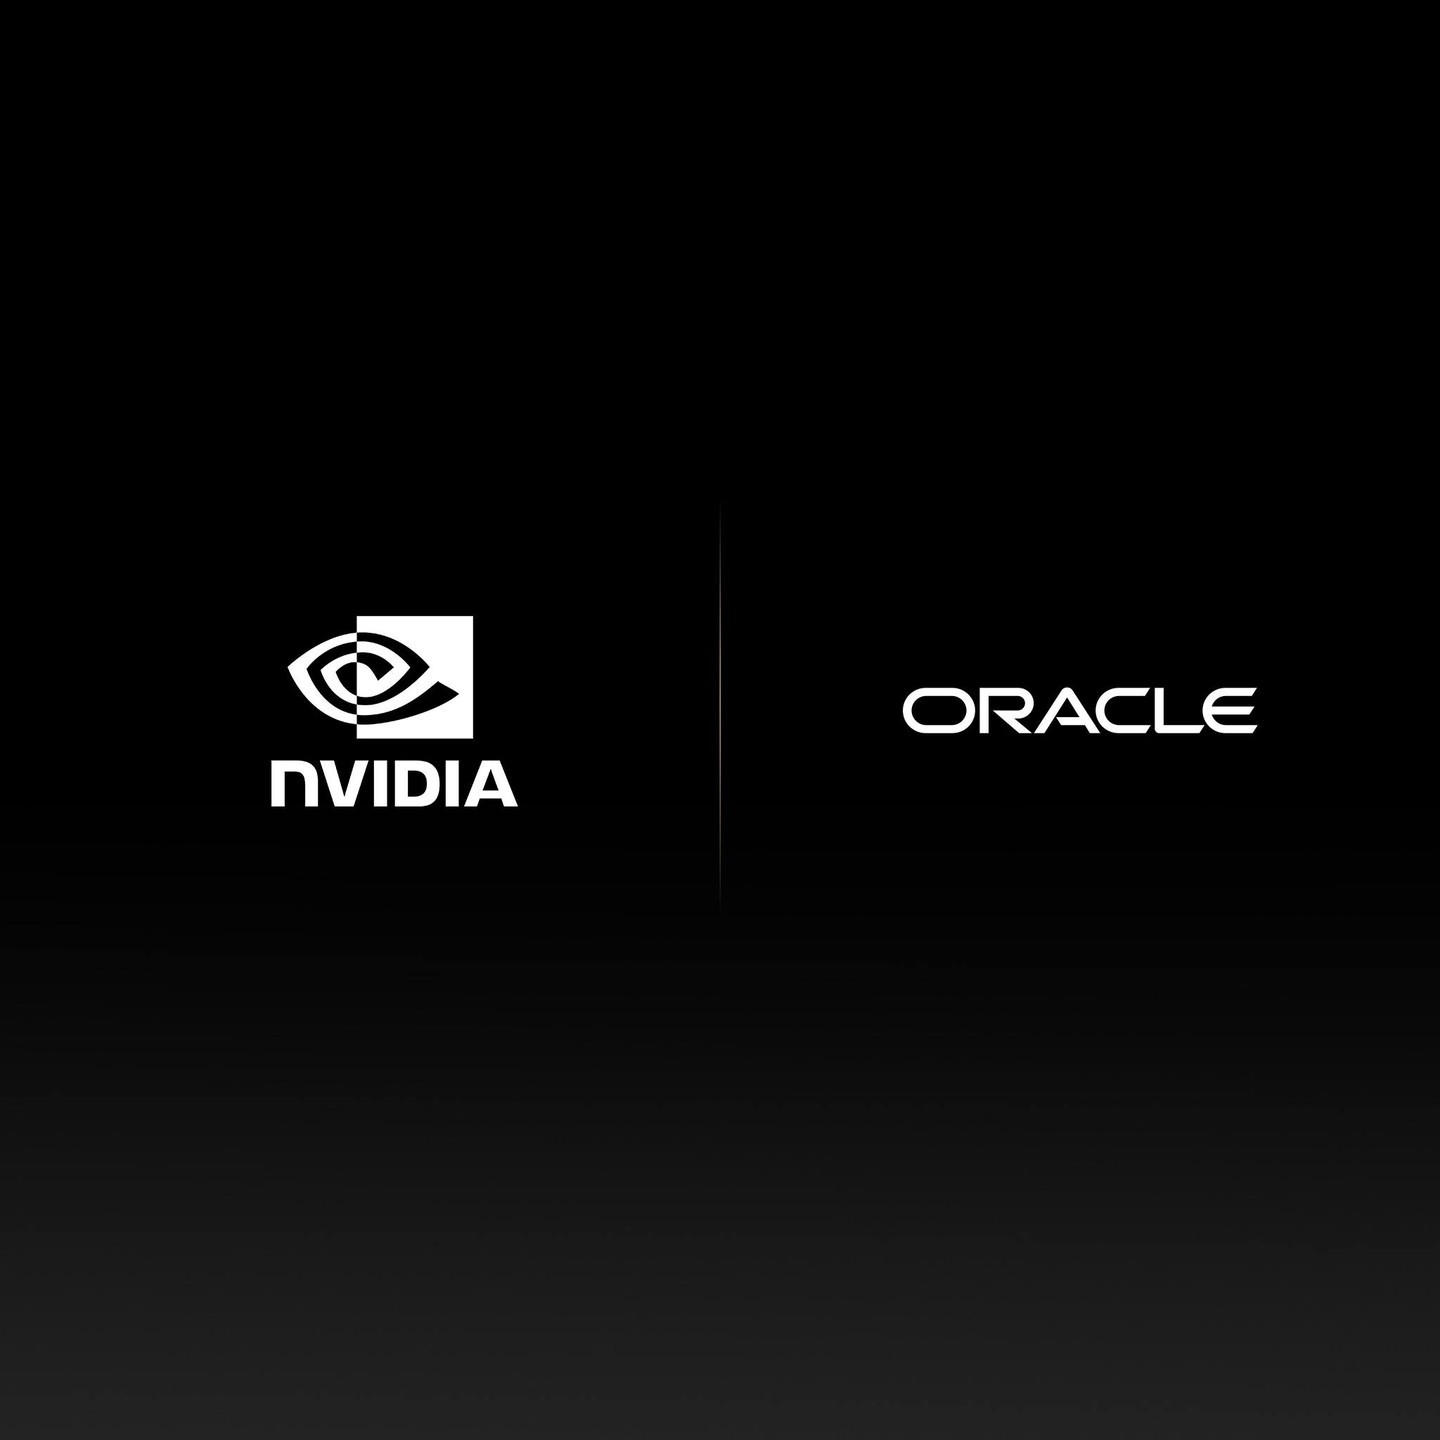 image  1 NVIDIA - Today at #CloudWorld, we announced a multi-year partnership with #Oracle to help customers